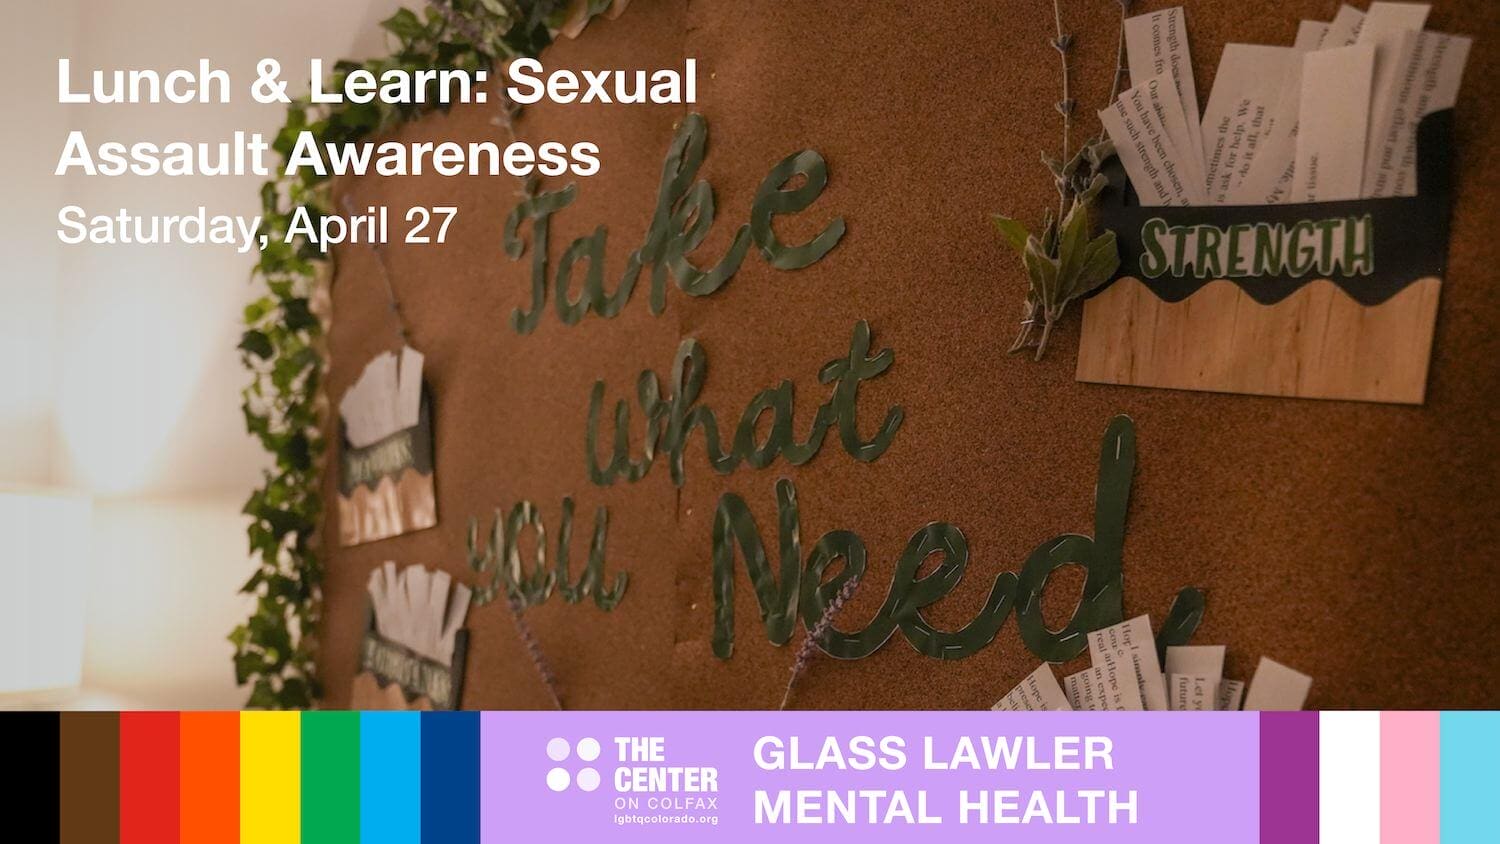 Lunch & Learn: Sexual Assault Awareness - Saturday, April 27